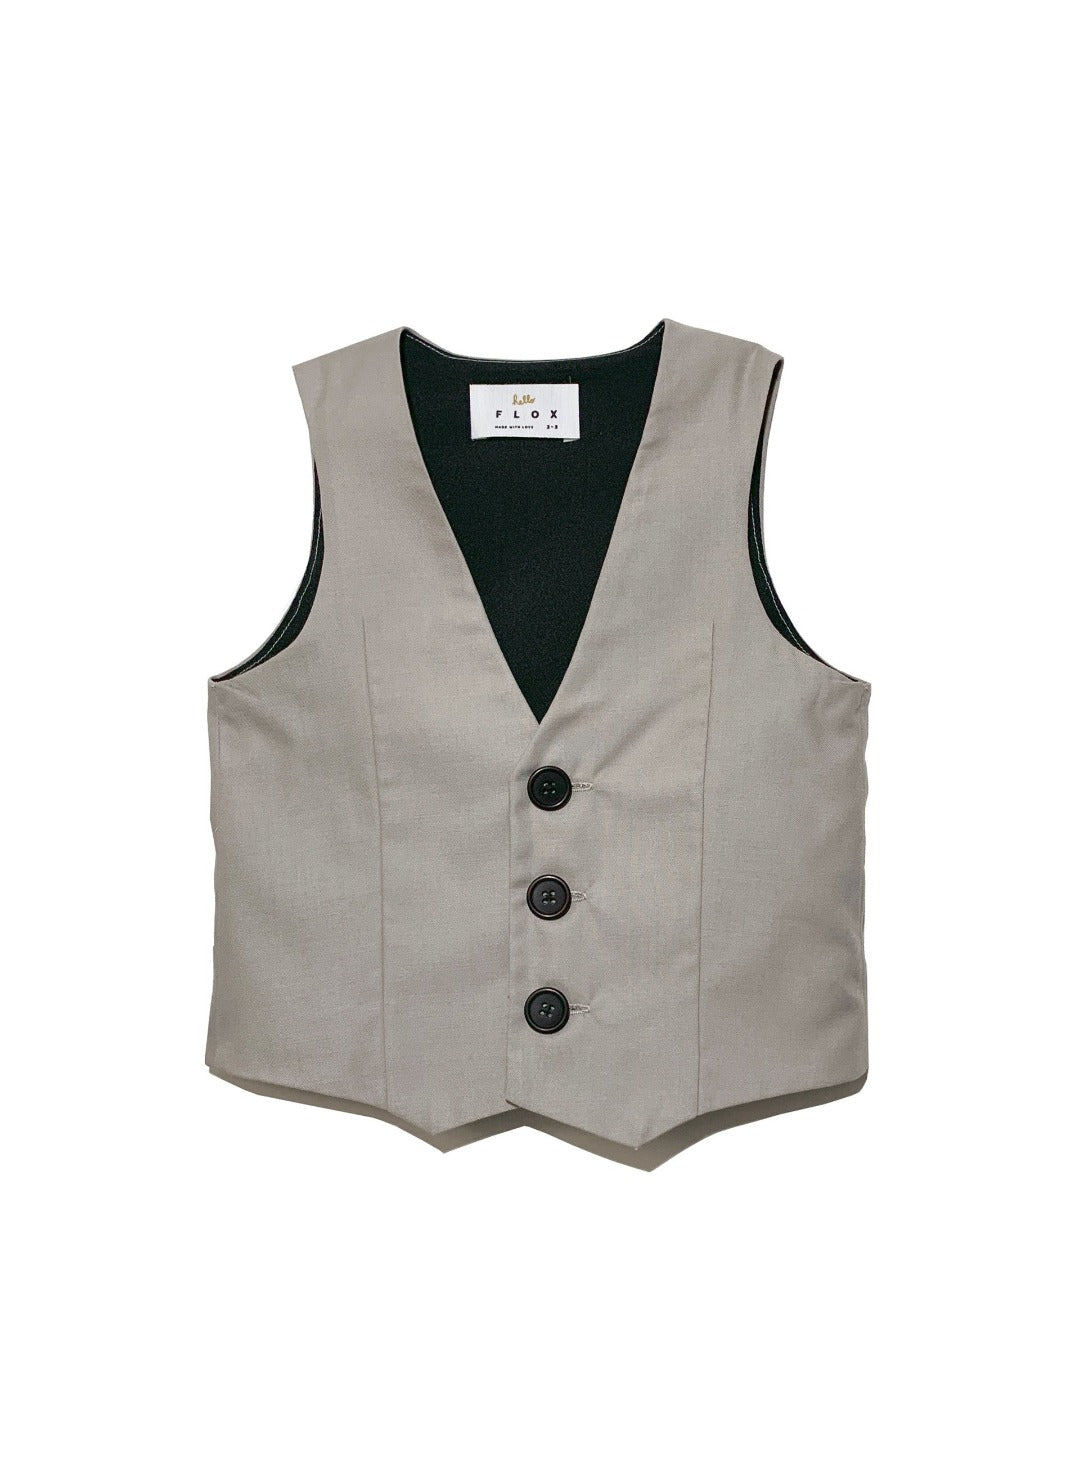 light grey vest with black buttons